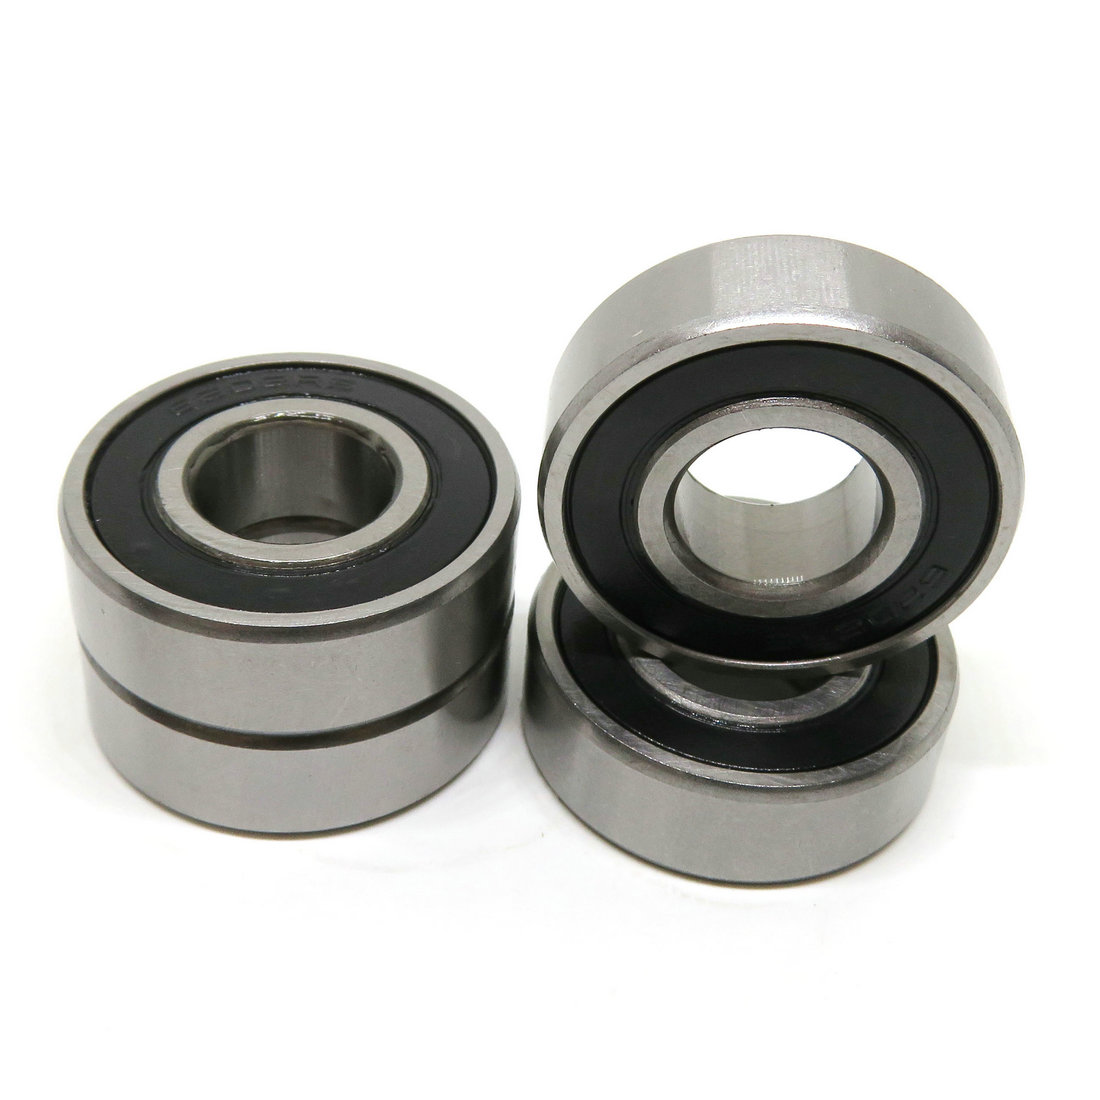 Industrial Machinery Ball Bearing 6209-2RS Double Rubber Seal Bearings 45x85x19mm 6209RS.jpg